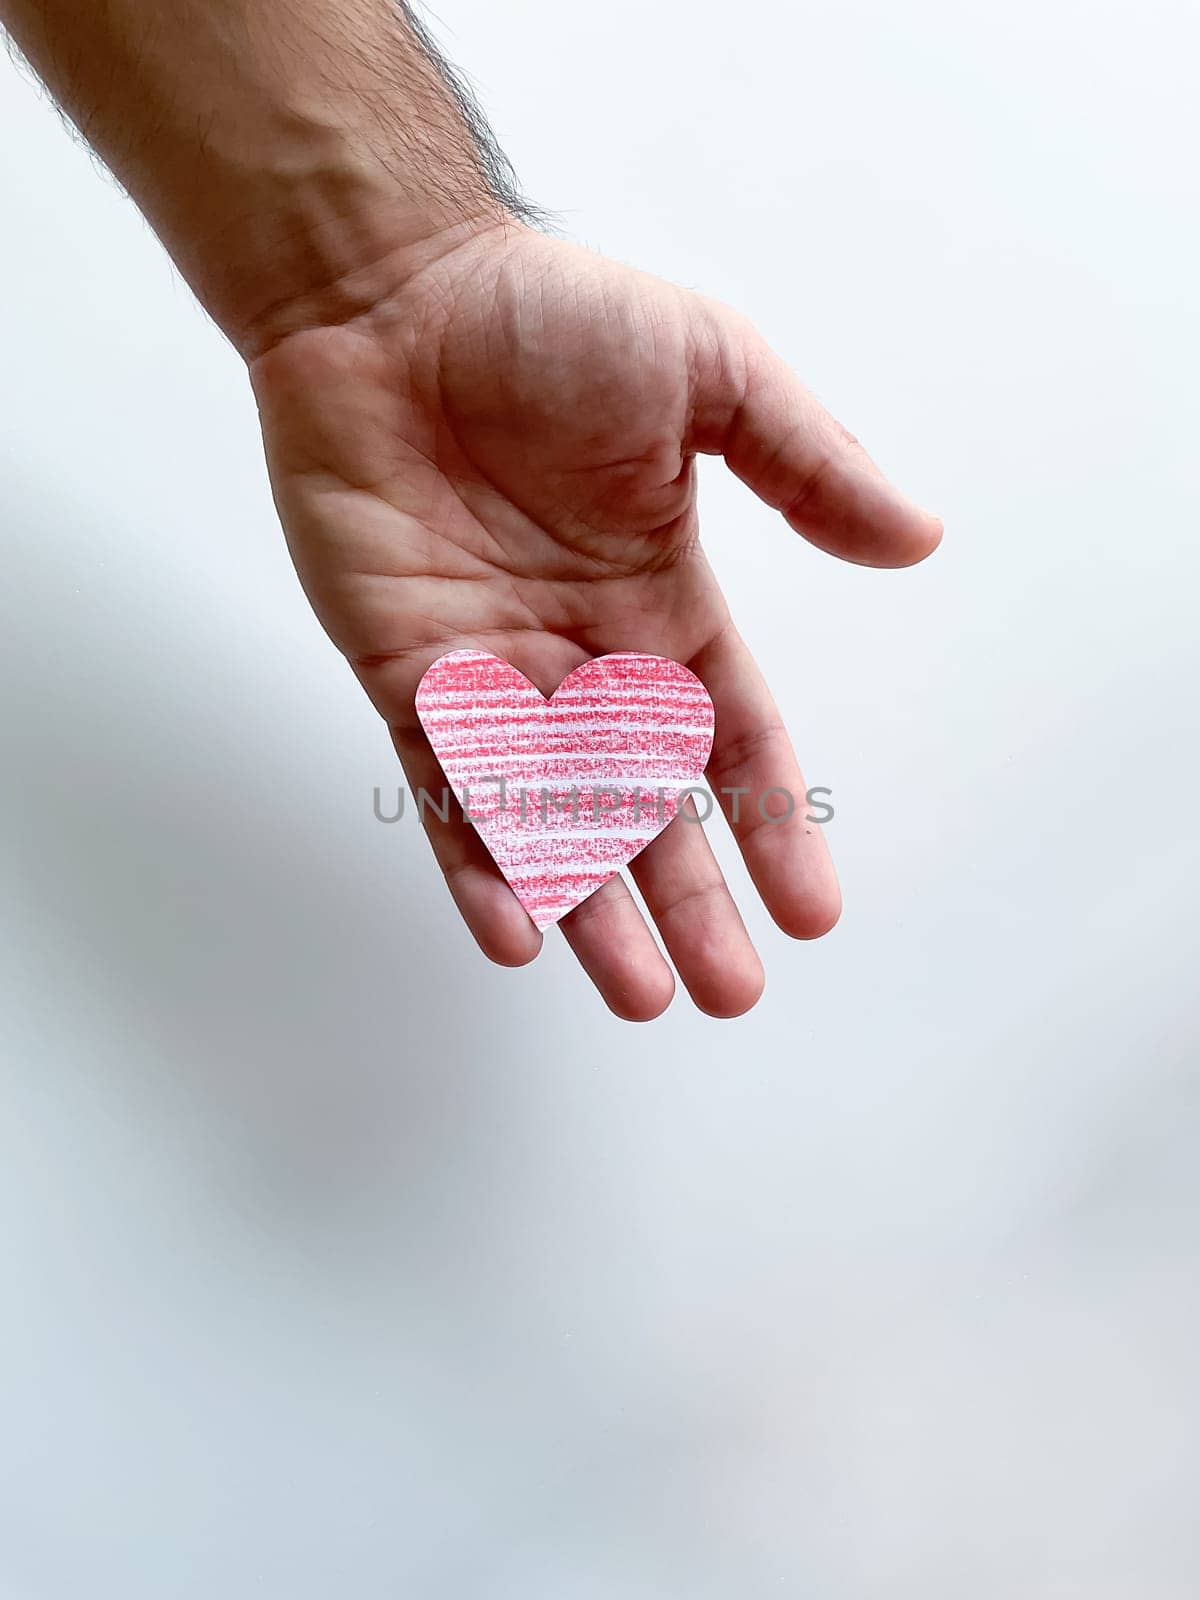 Mans hand holding striped pink paper heart against white background, symbolizing love and care, with copy space. Can be used for design and print related to childrens, love and relationships themes, charity and healthcare campaigns, emotional and mental well being content by Lunnica